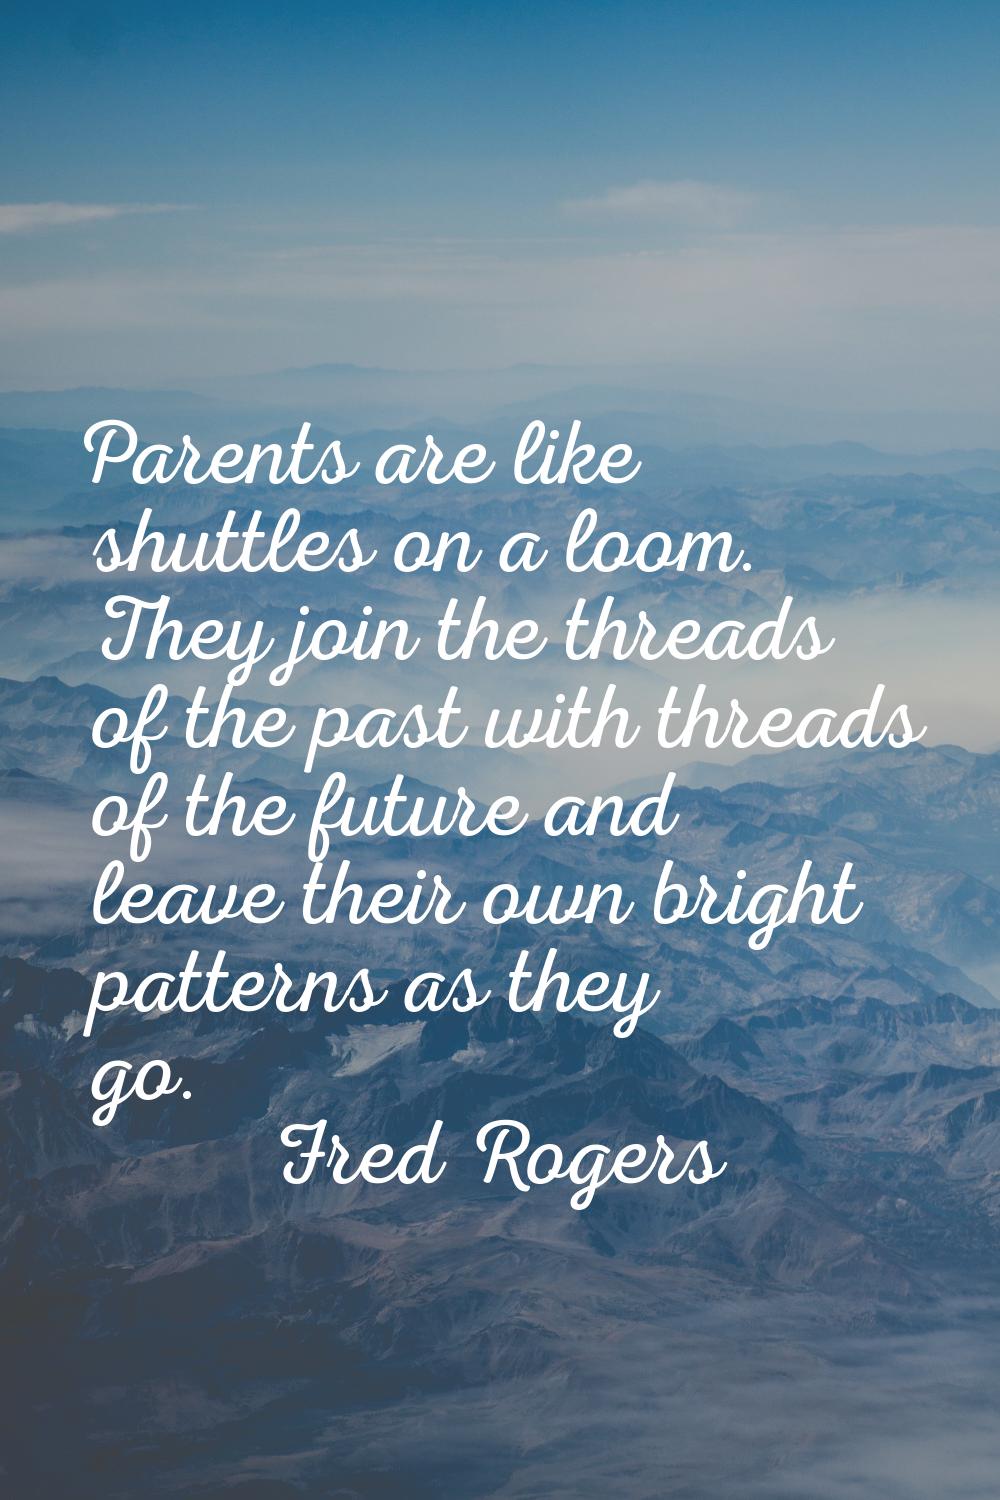 Parents are like shuttles on a loom. They join the threads of the past with threads of the future a